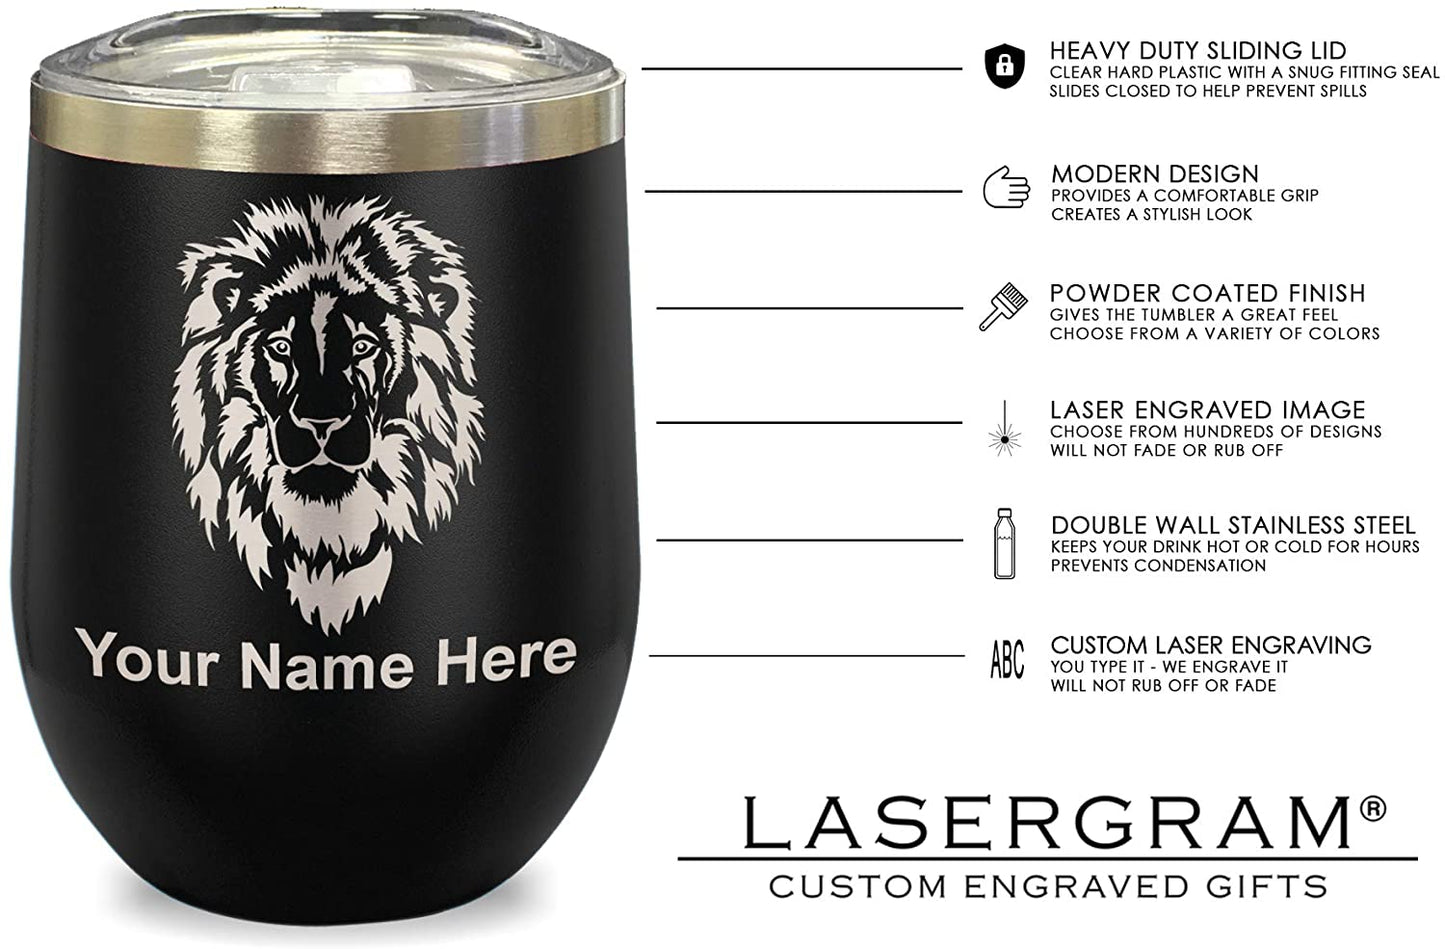 LaserGram Double Wall Stainless Steel Wine Glass, World's Greatest Friend, Personalized Engraving Included